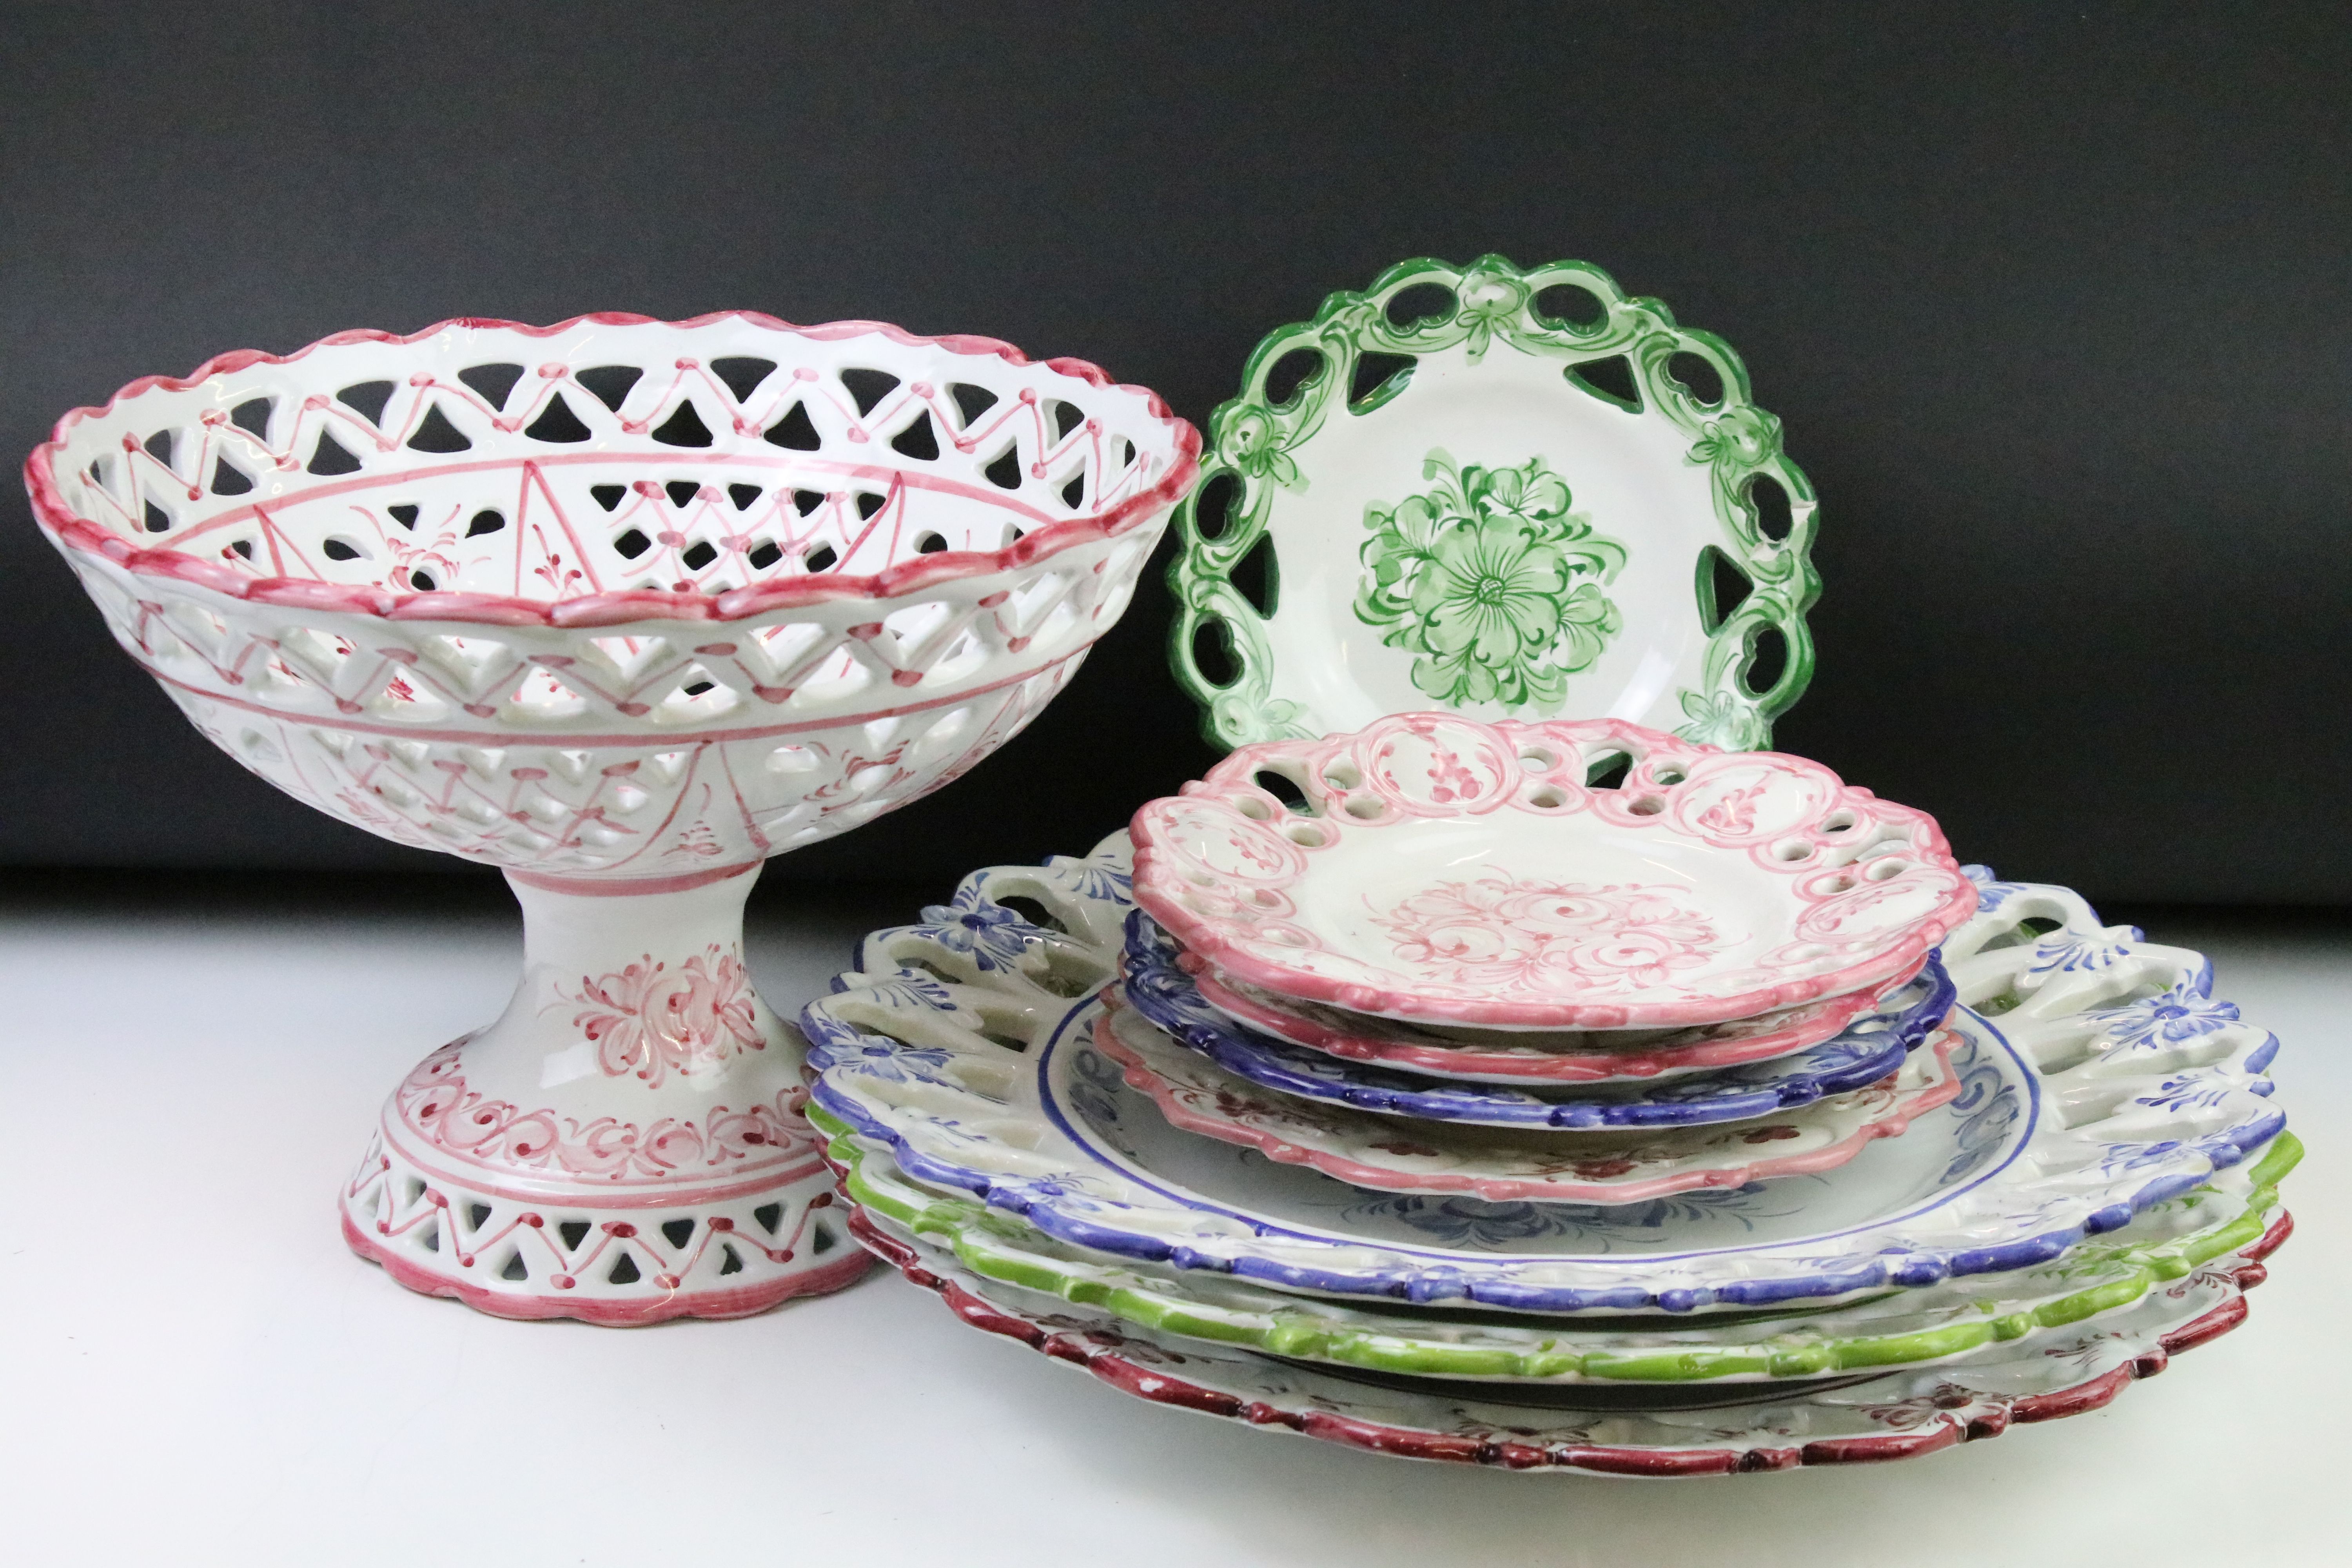 Collection of Portuguese ceramics to include five small wall plates and three large wall plates, all